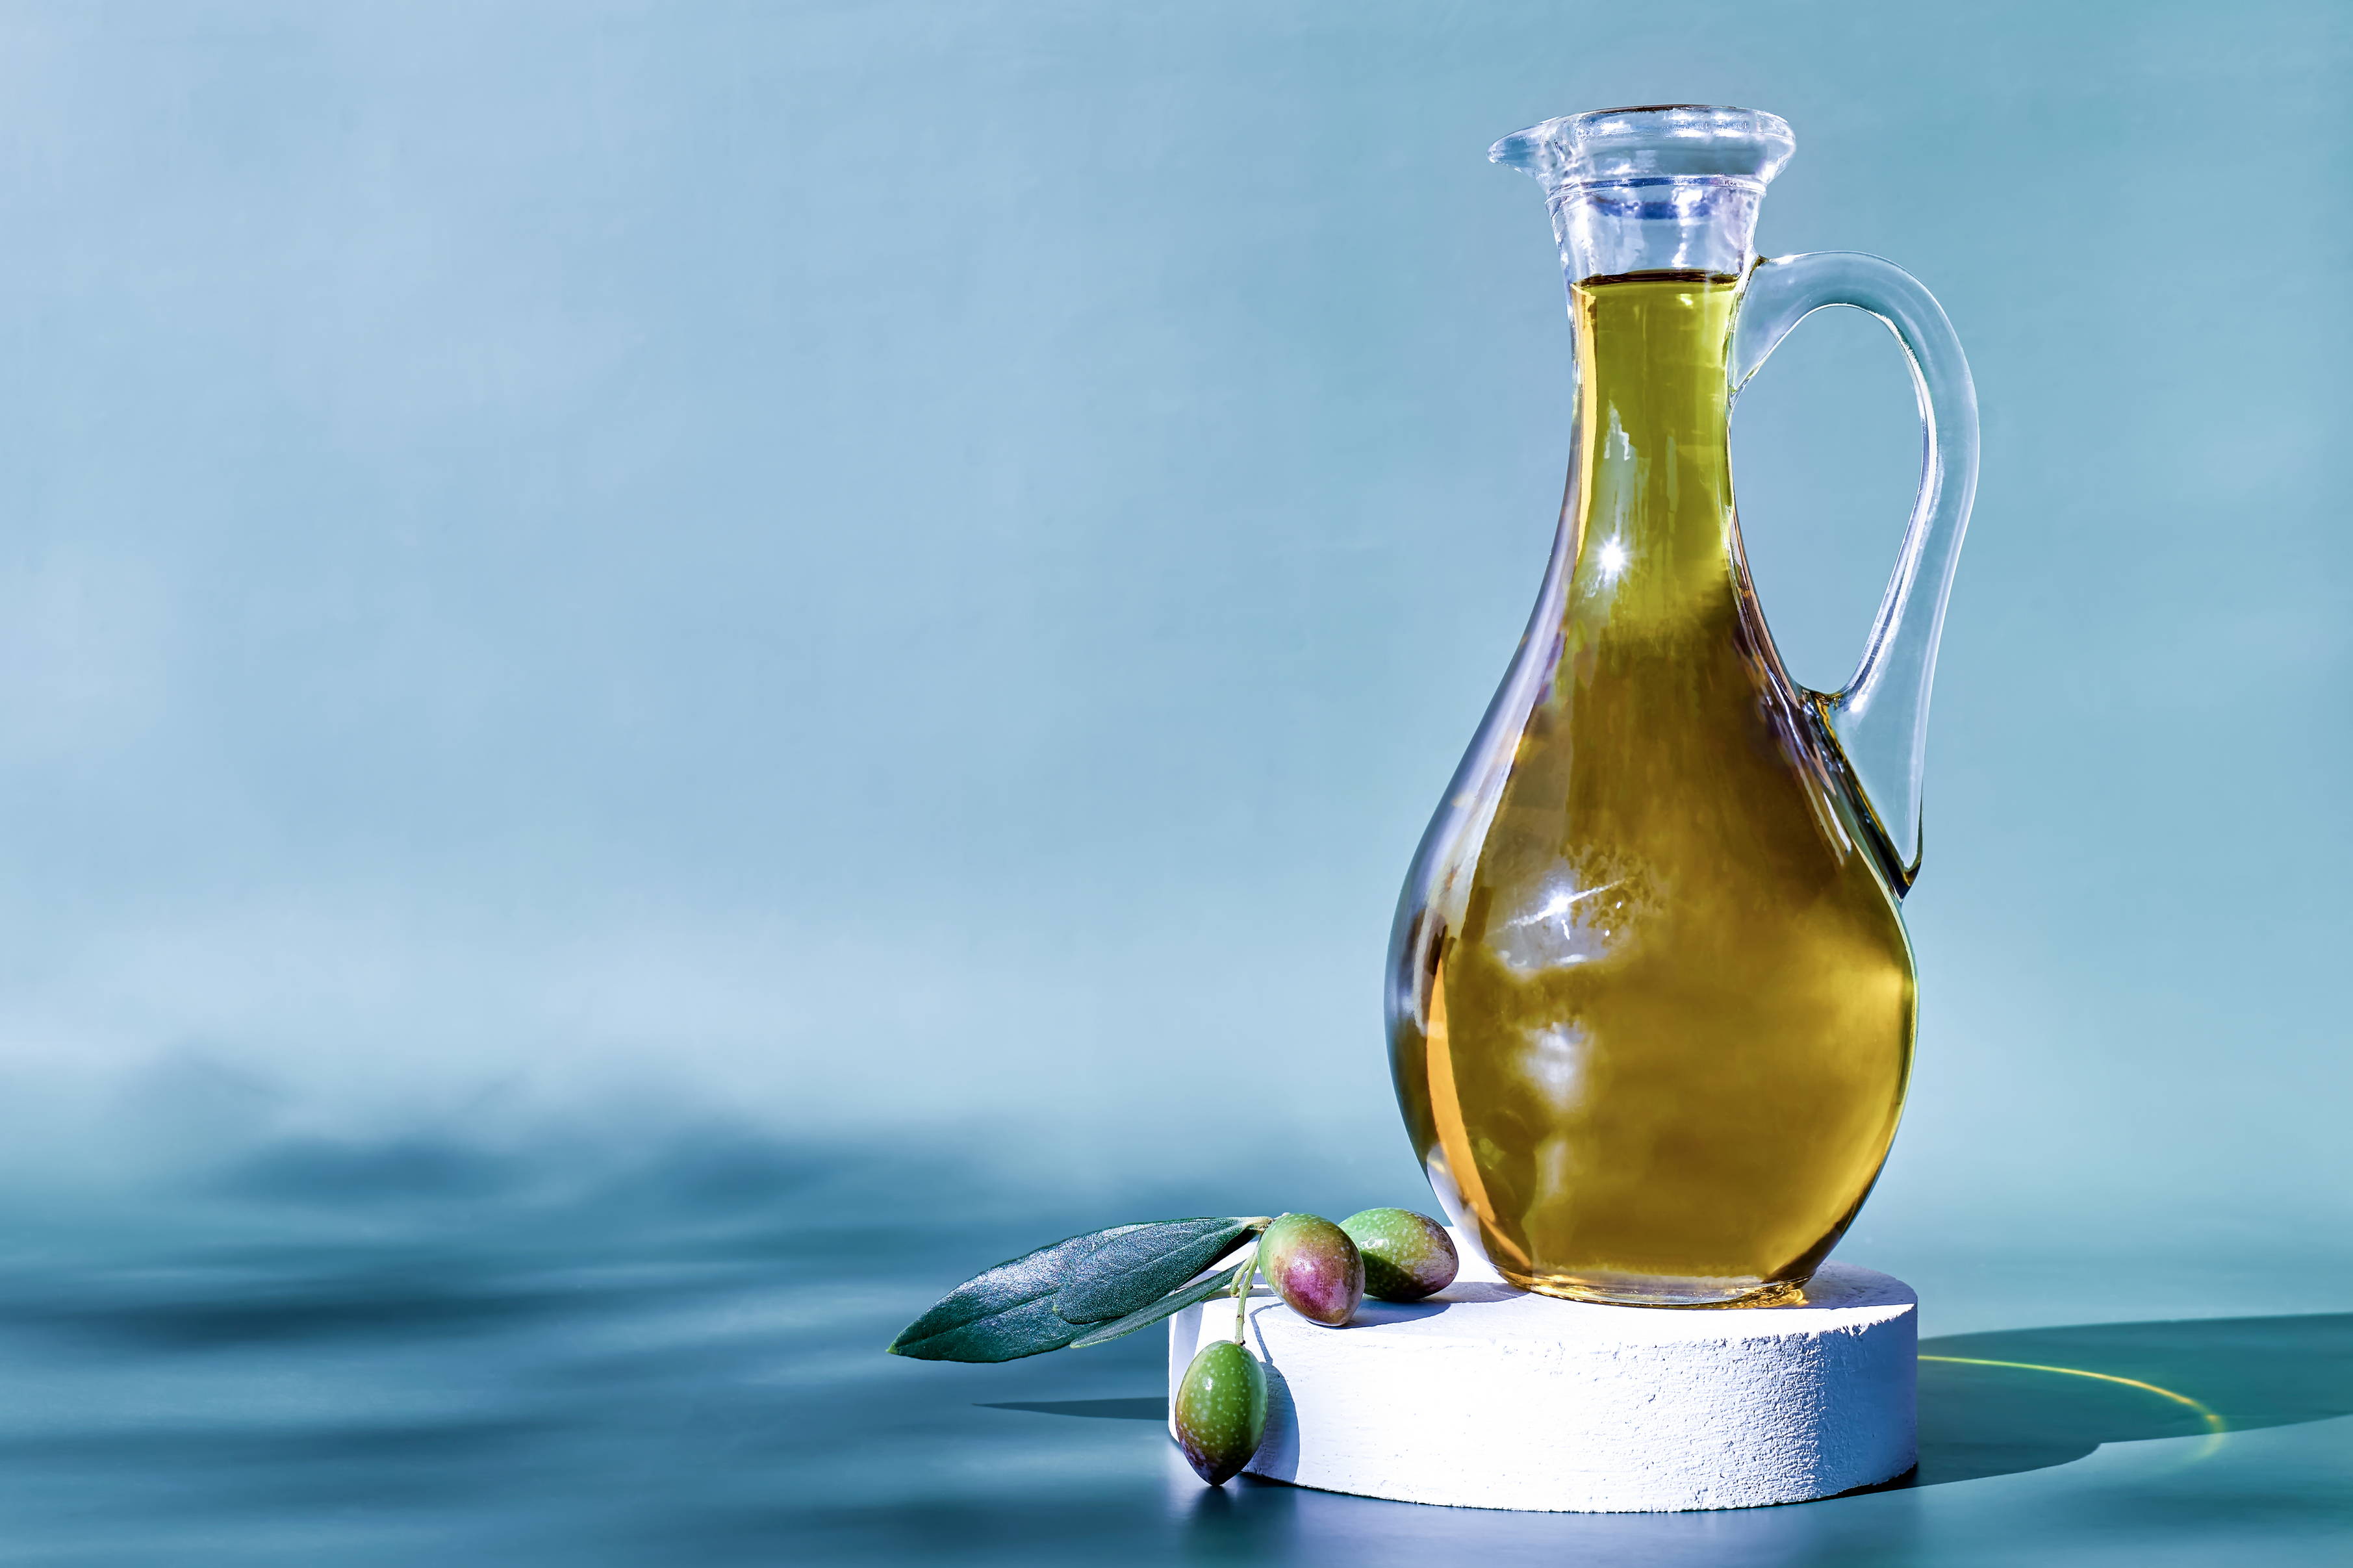 An olive oil dispenser makes a wonderful present for a family gift exchange.